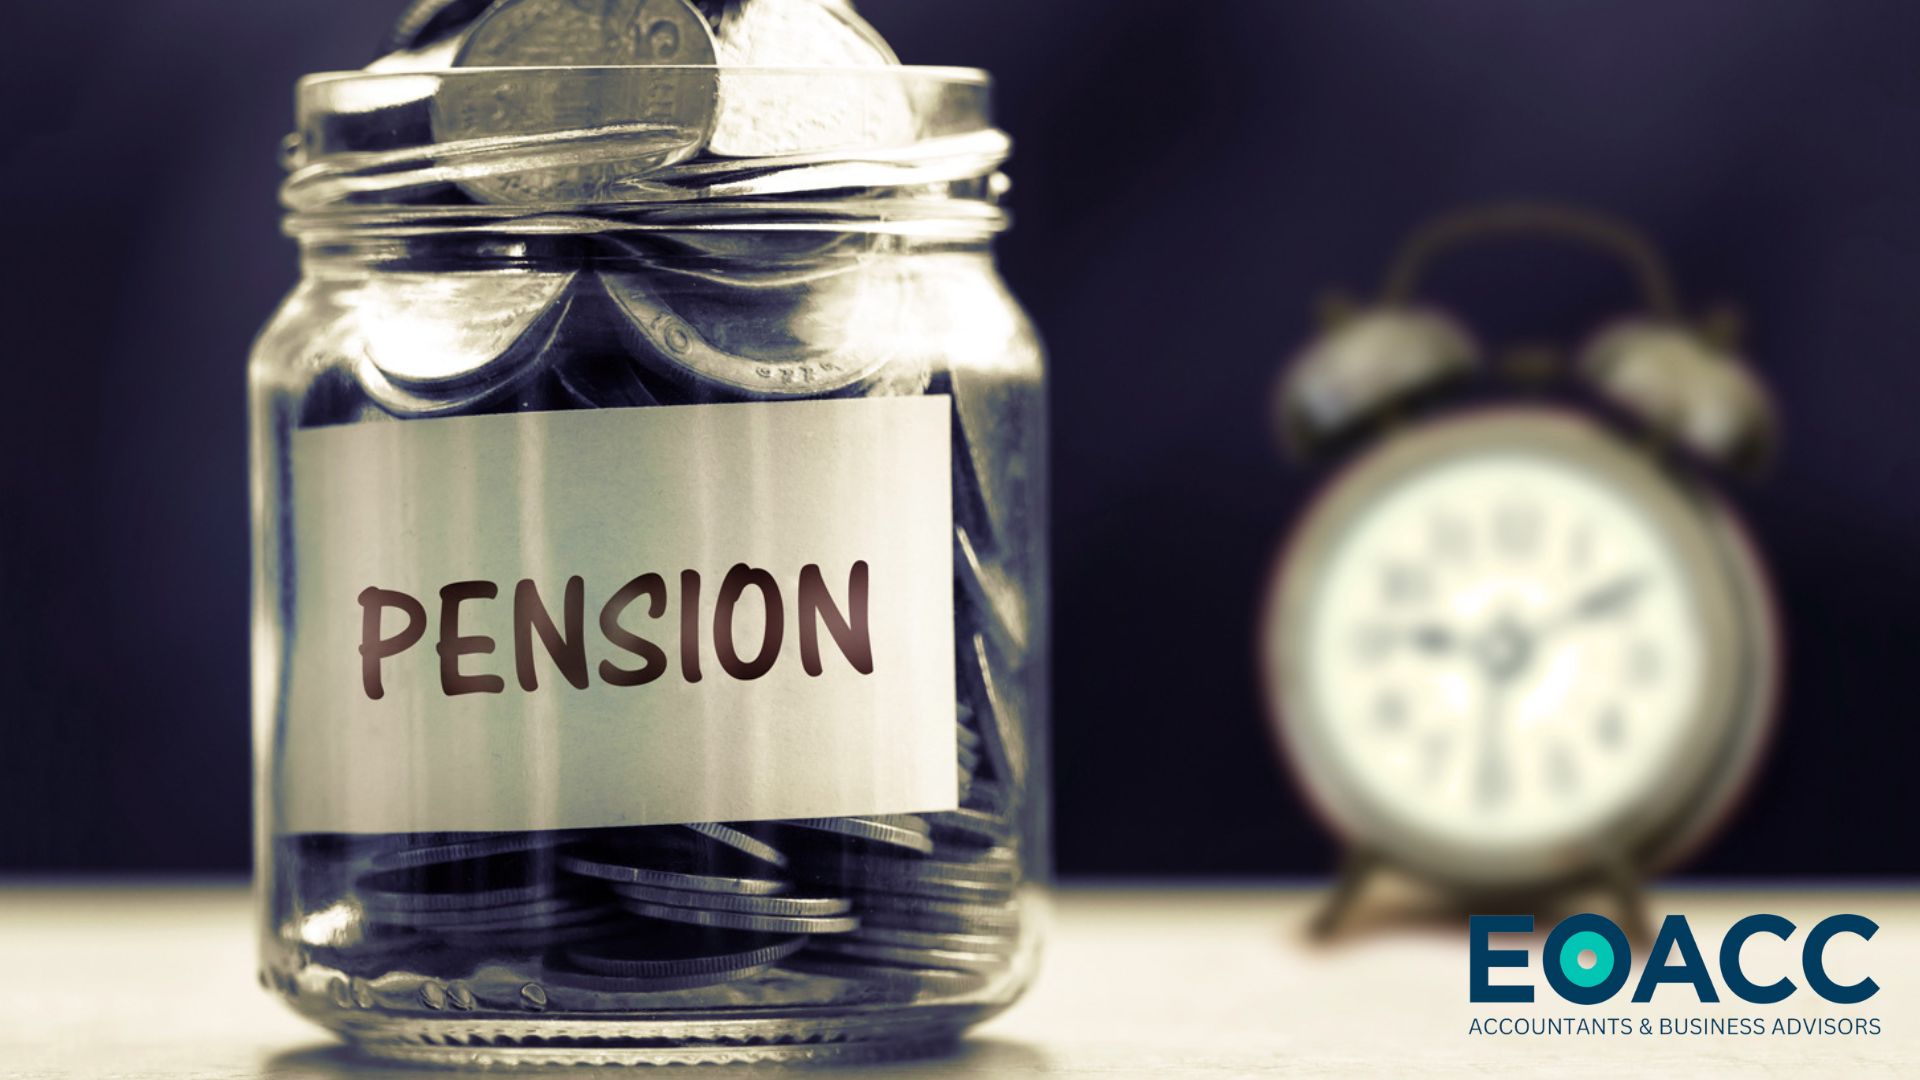 TEN YEARS OF AUTOMATIC ENROLMENT ACHIEVES OVER £114BN IN PENSION SAVINGS